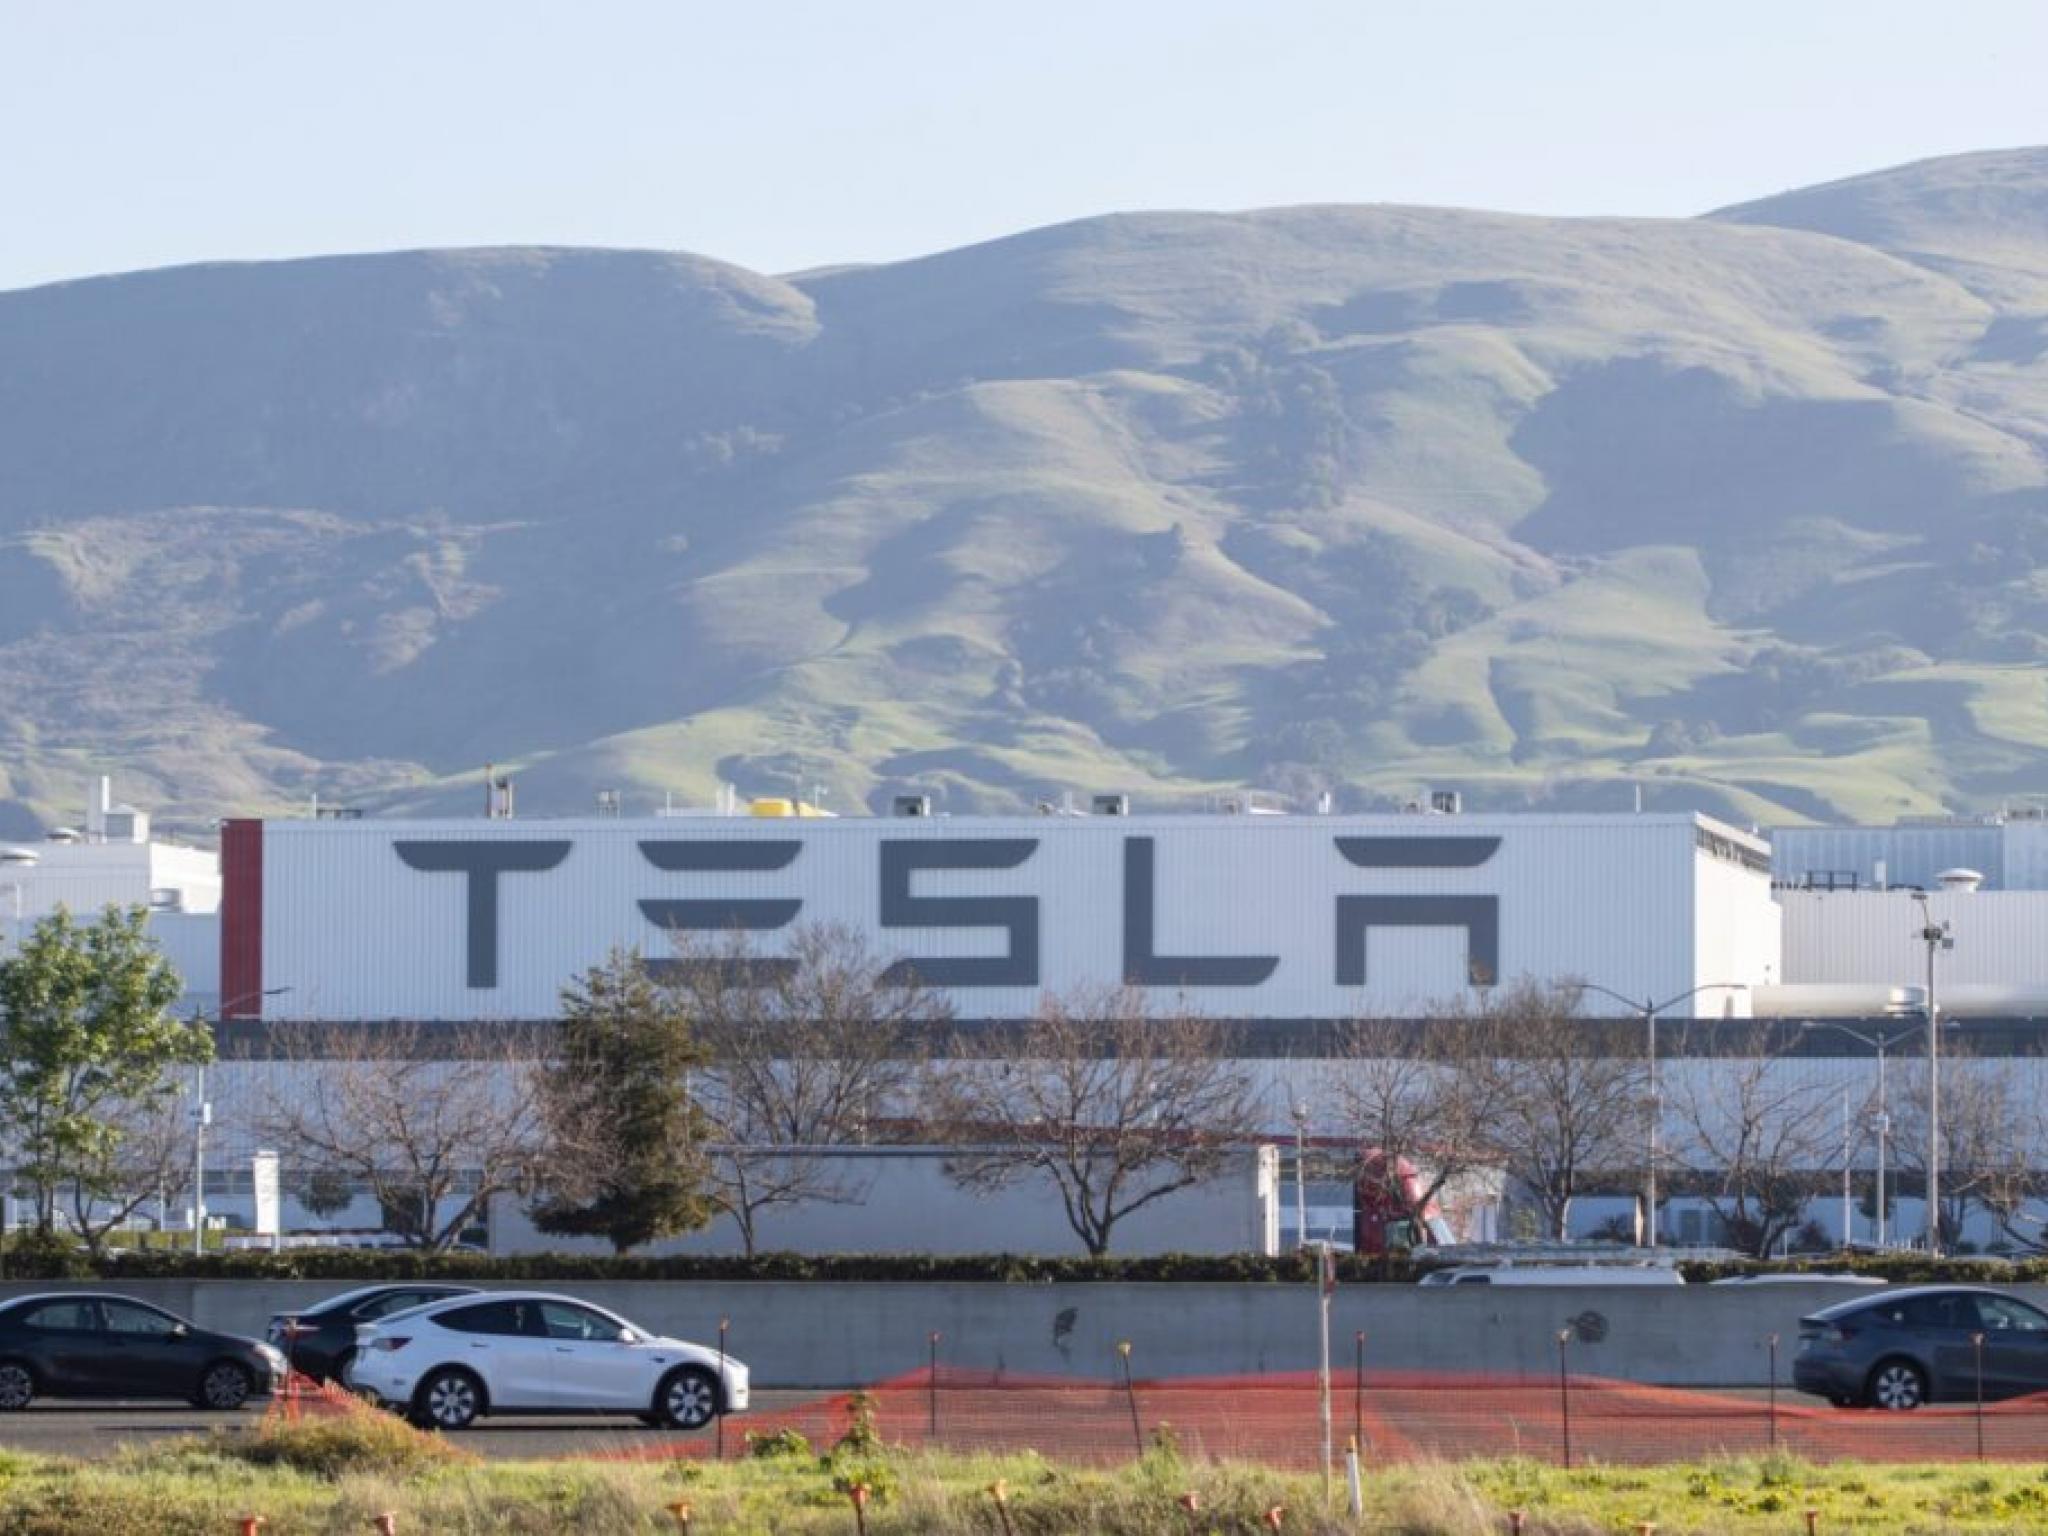  blaze-at-teslas-fremont-factory-quickly-contained-no-injuries-reported 